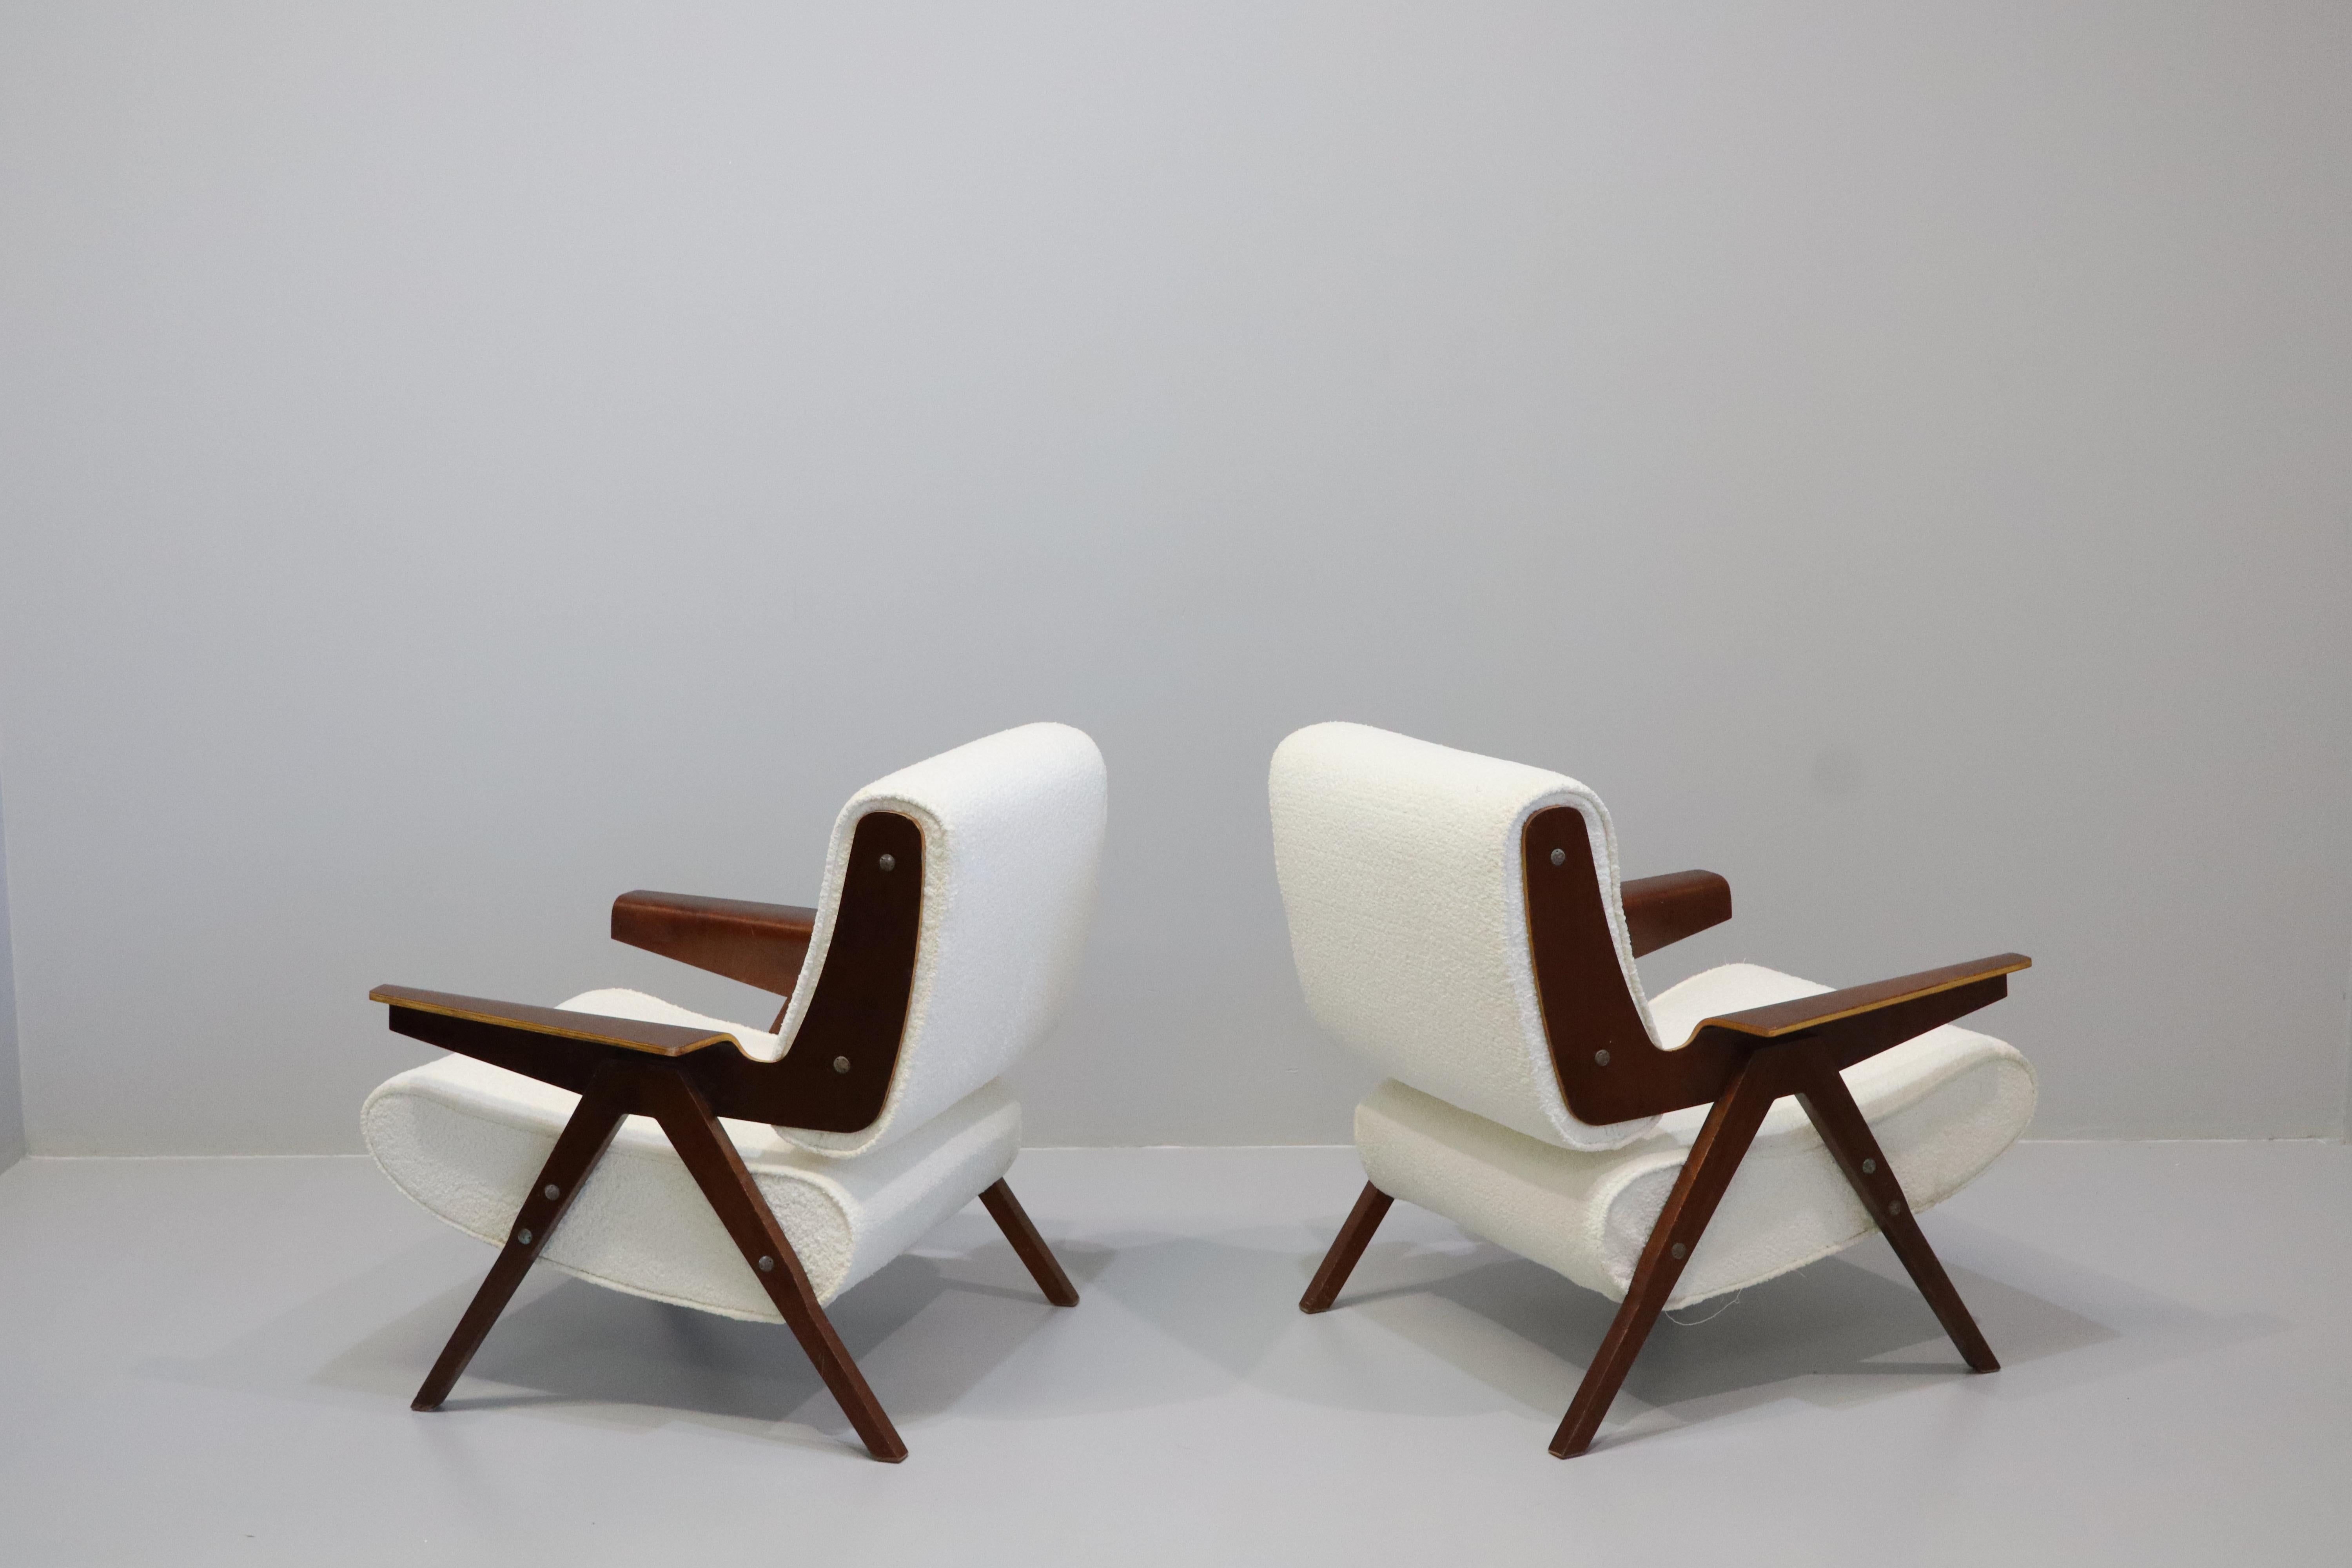 Mid-Century Modern Pair Of Gianfranco Frattini Model 831 Lounge Chairs For Cassina, 1950s For Sale